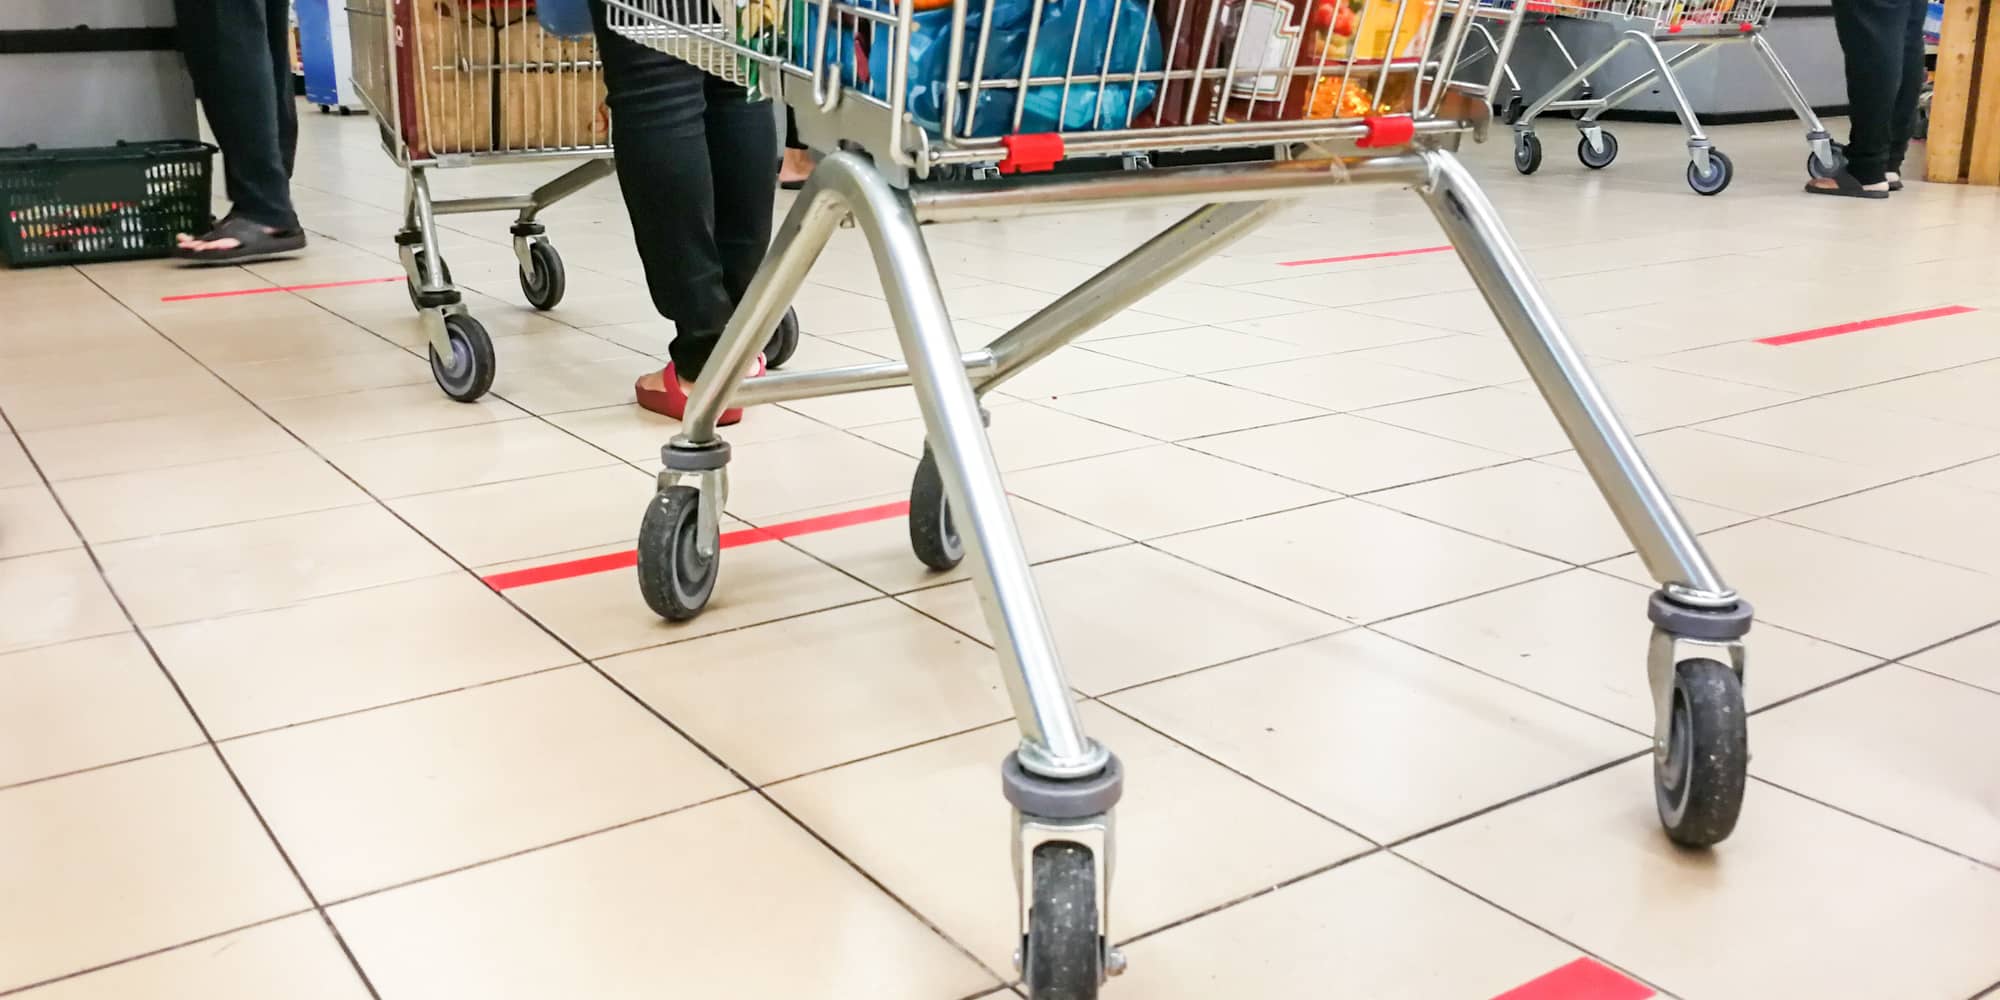 Shopping trolley in a socially distanced retail store layout